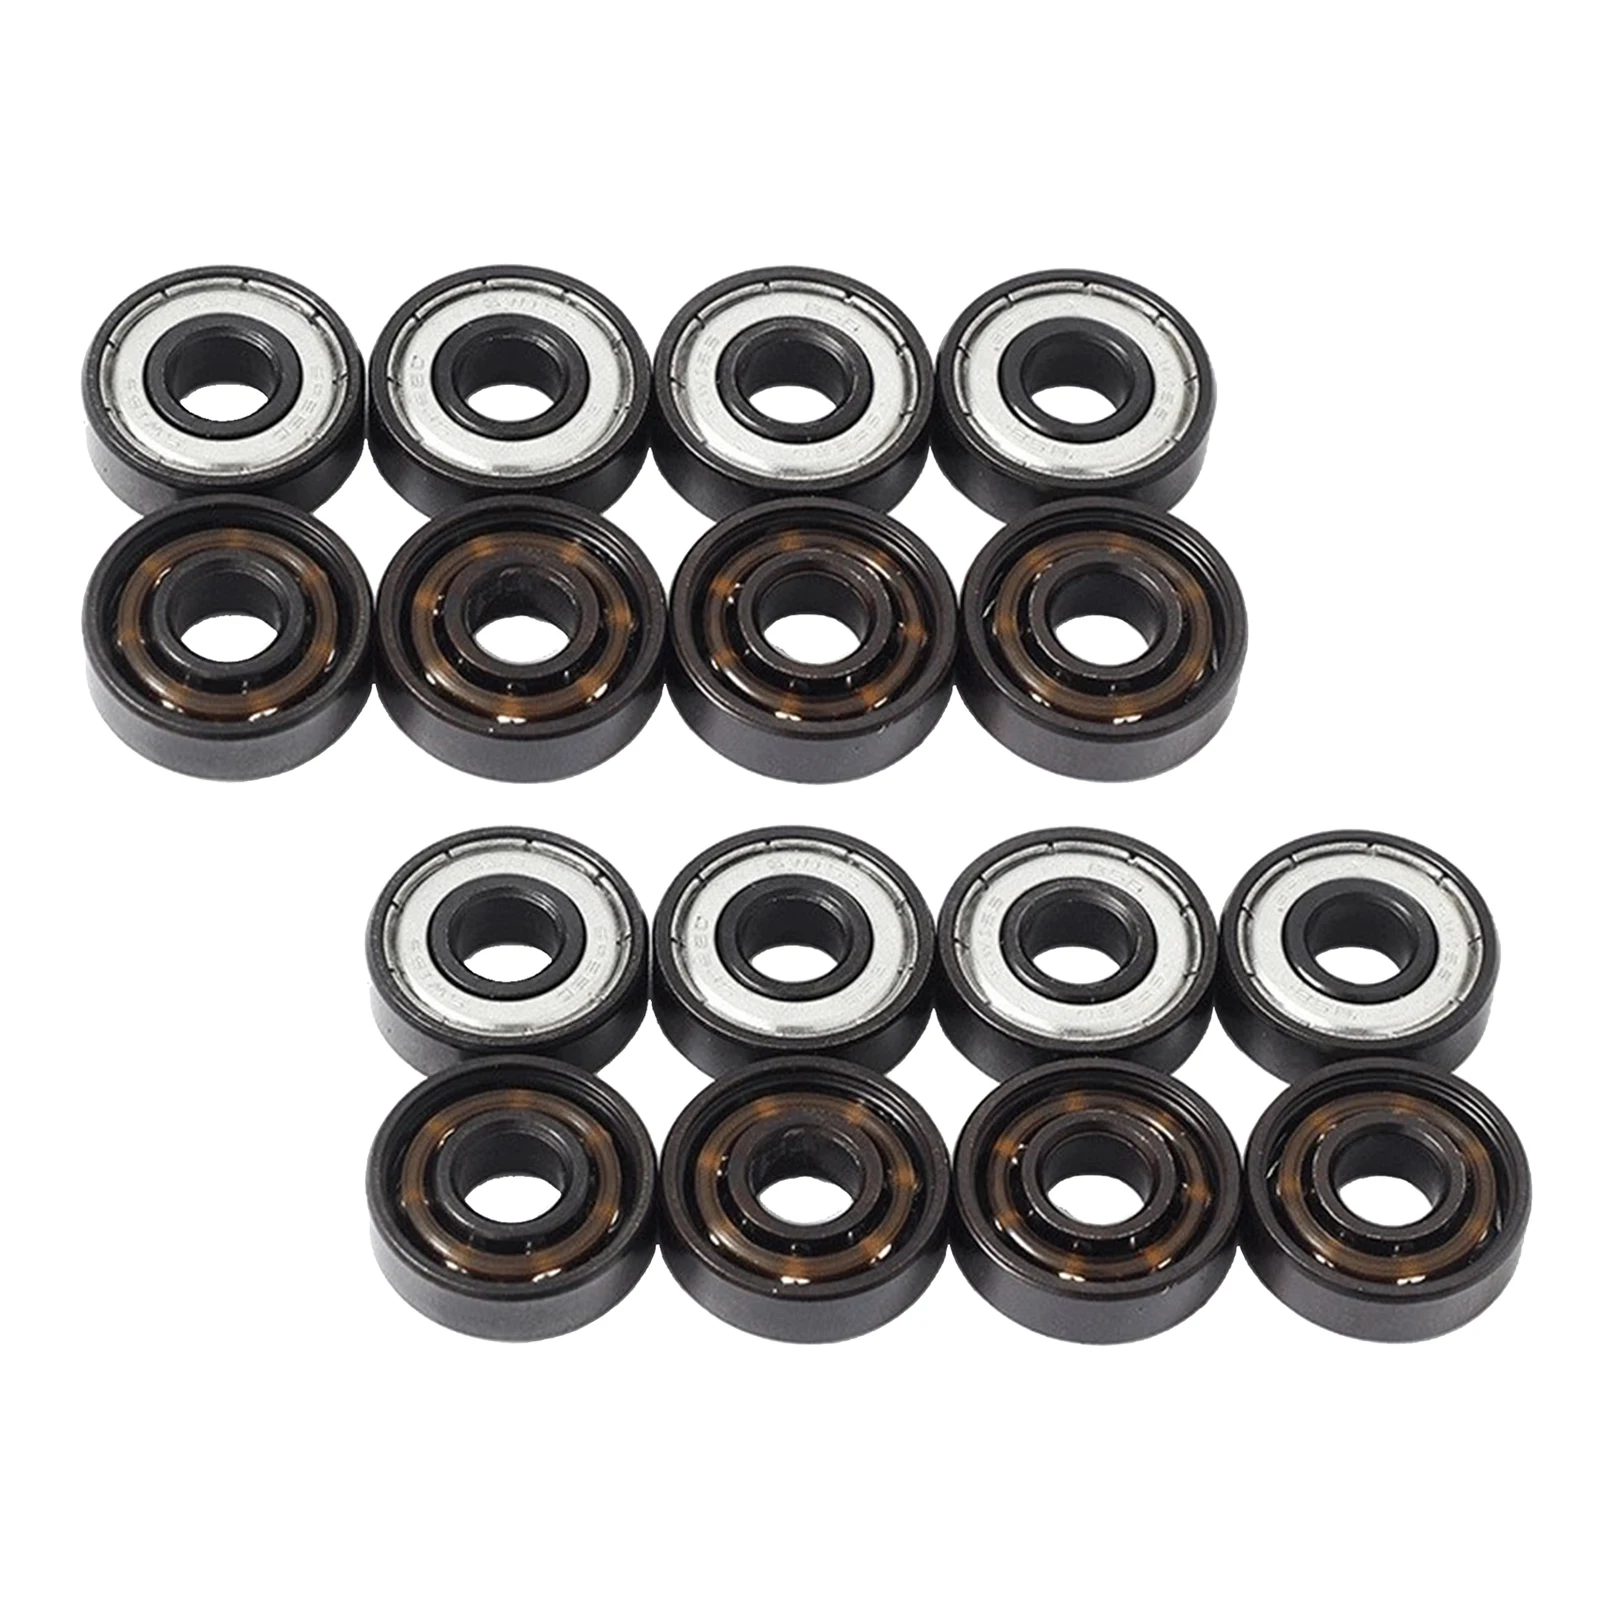 16 Pack Replacement Skateboard Bearings 8mm Scooter Wheels Accessories